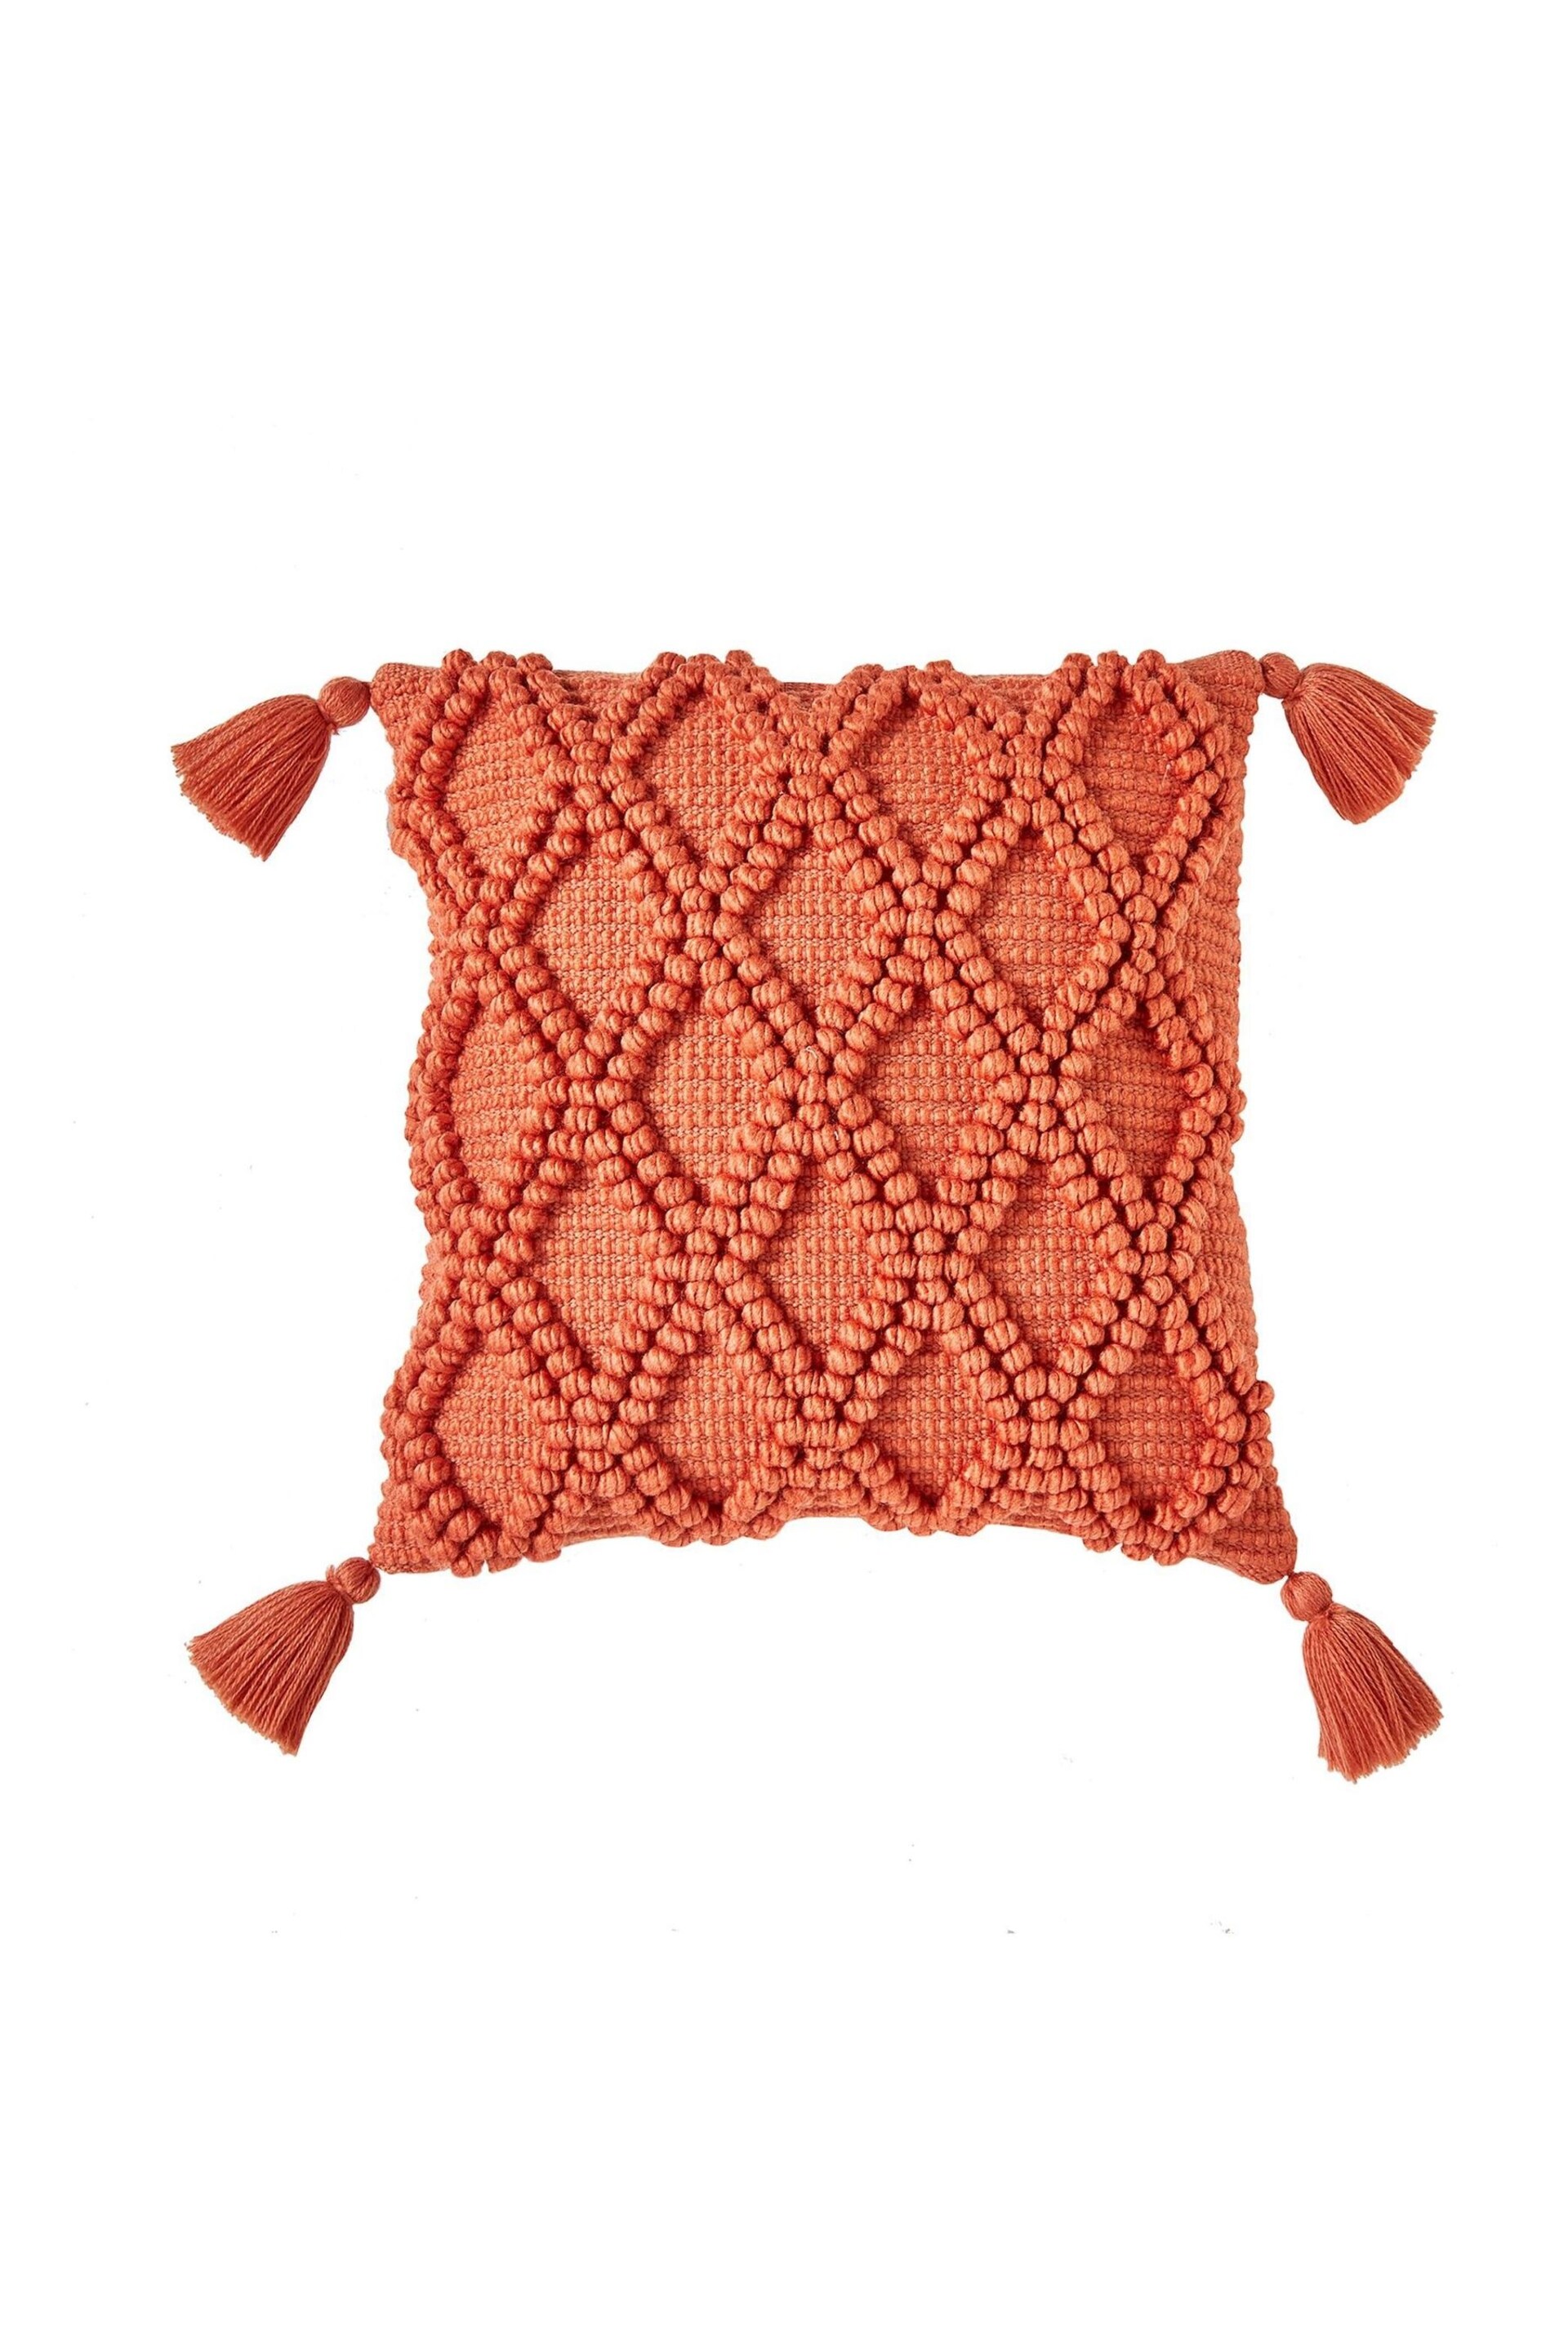 Drift Home Terracotta Red Alda Outdoor Textured Filled Cushion - Image 2 of 4